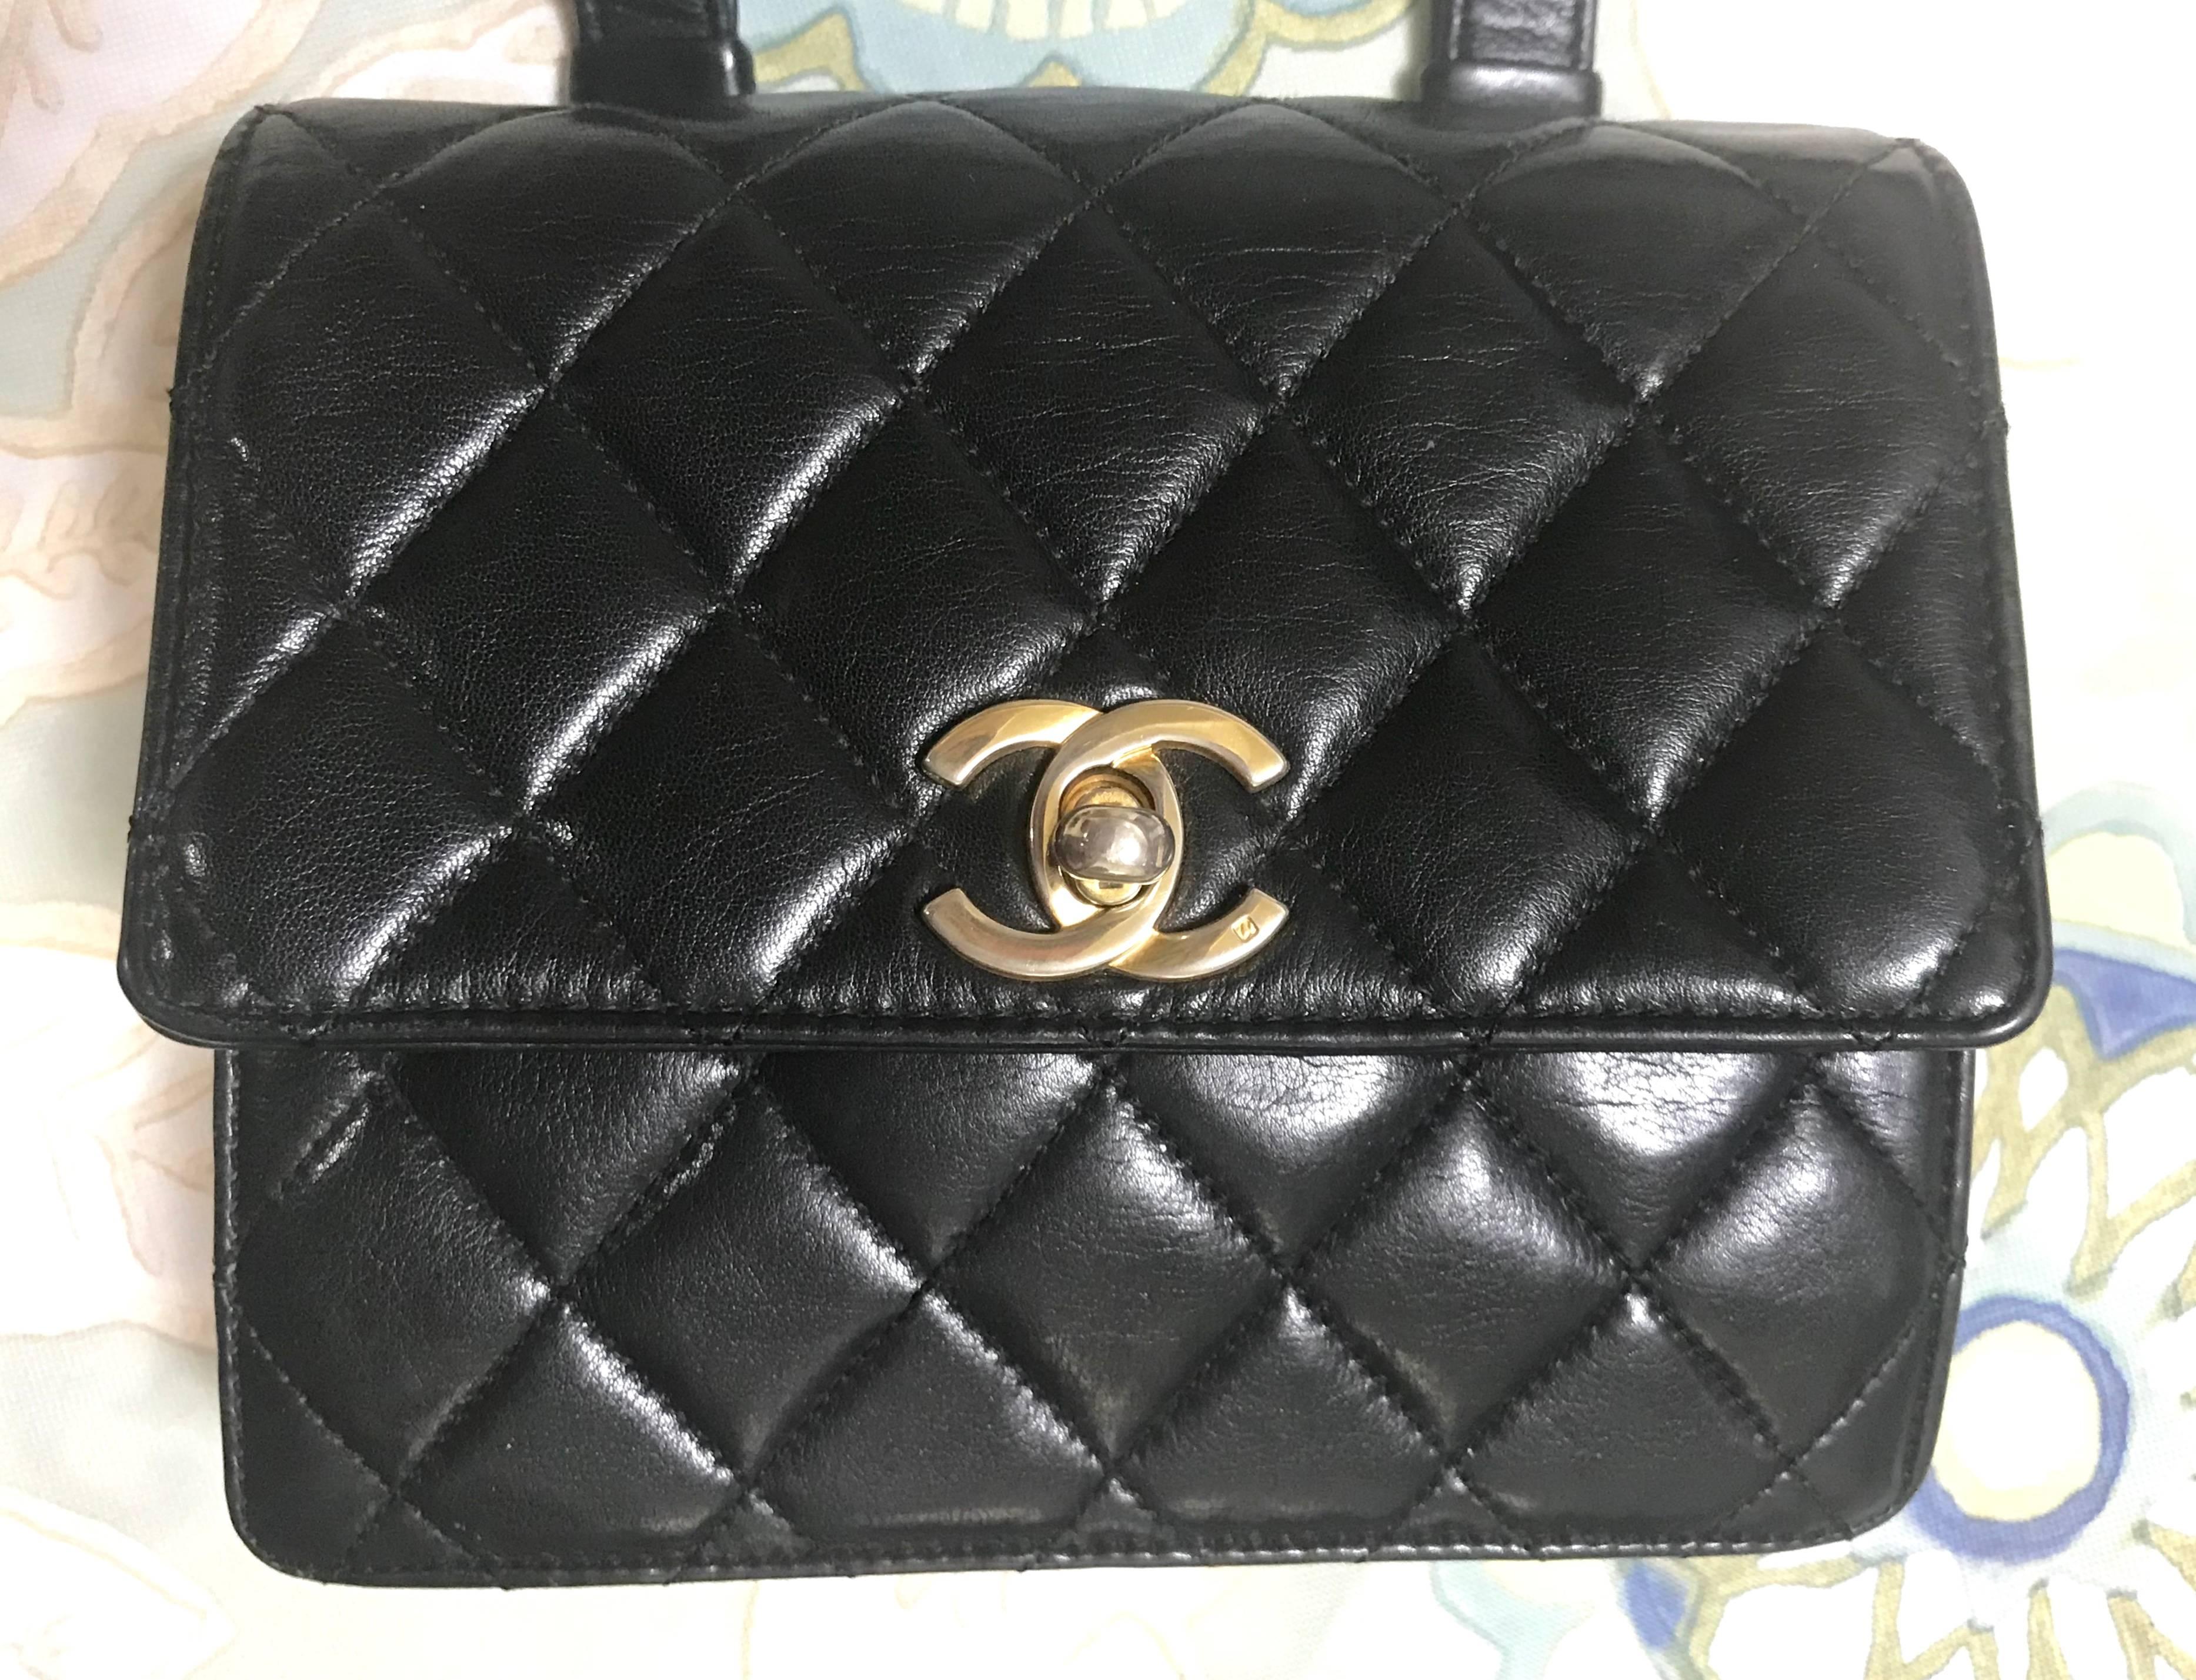 ***Note***
This fanny pack was first missing the matching belt, so as a set, we put the belt from the collection in year of 2003 to go with this purse, so you can use as a fanny pack as well.

1980-90s. Vintage CHANEL square black lambskin waist